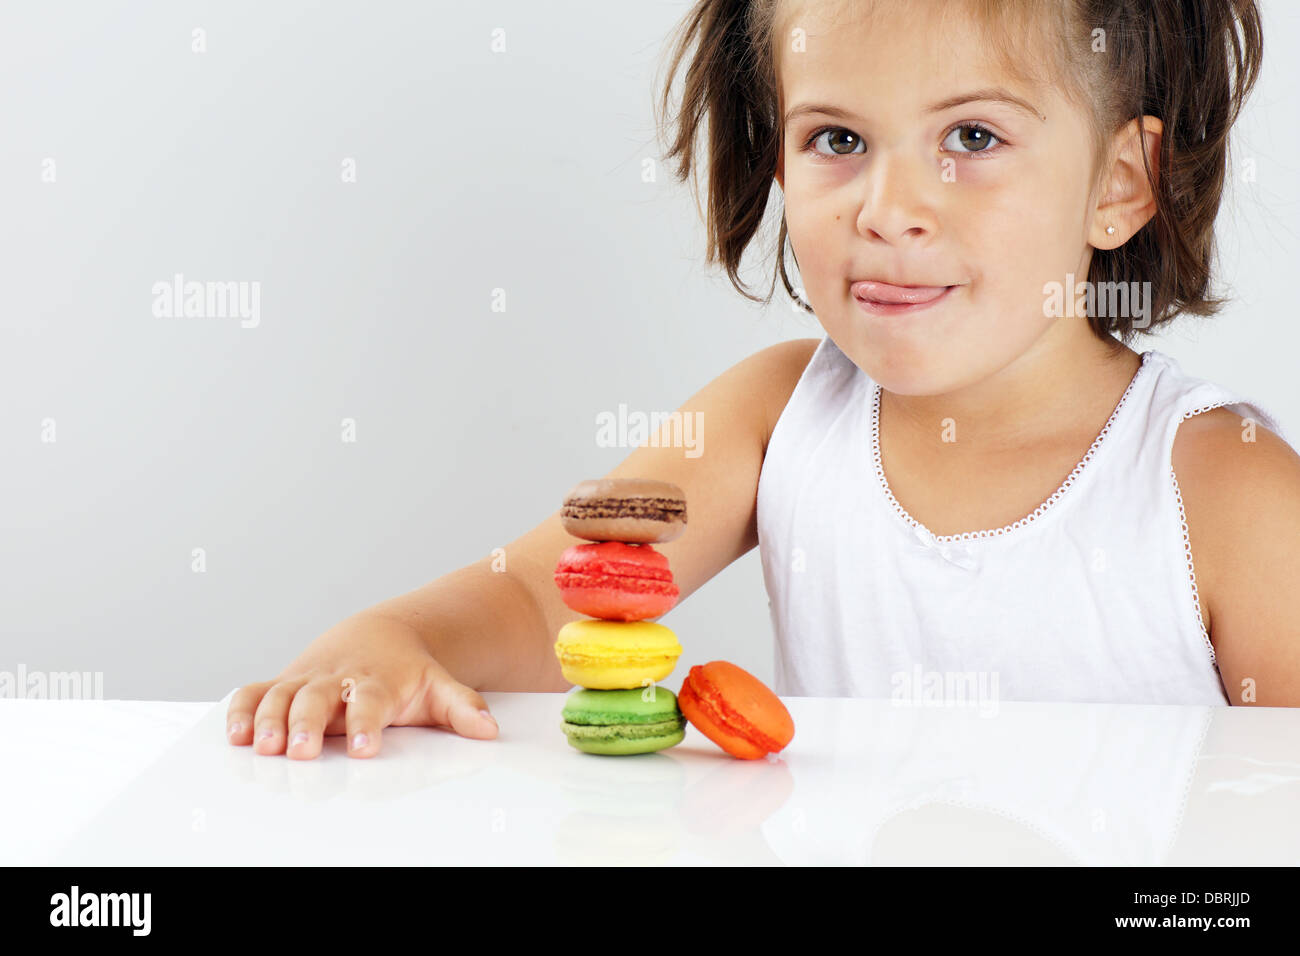 Cute little girl licking her lips in front of colorful stack of macaroons Stock Photo